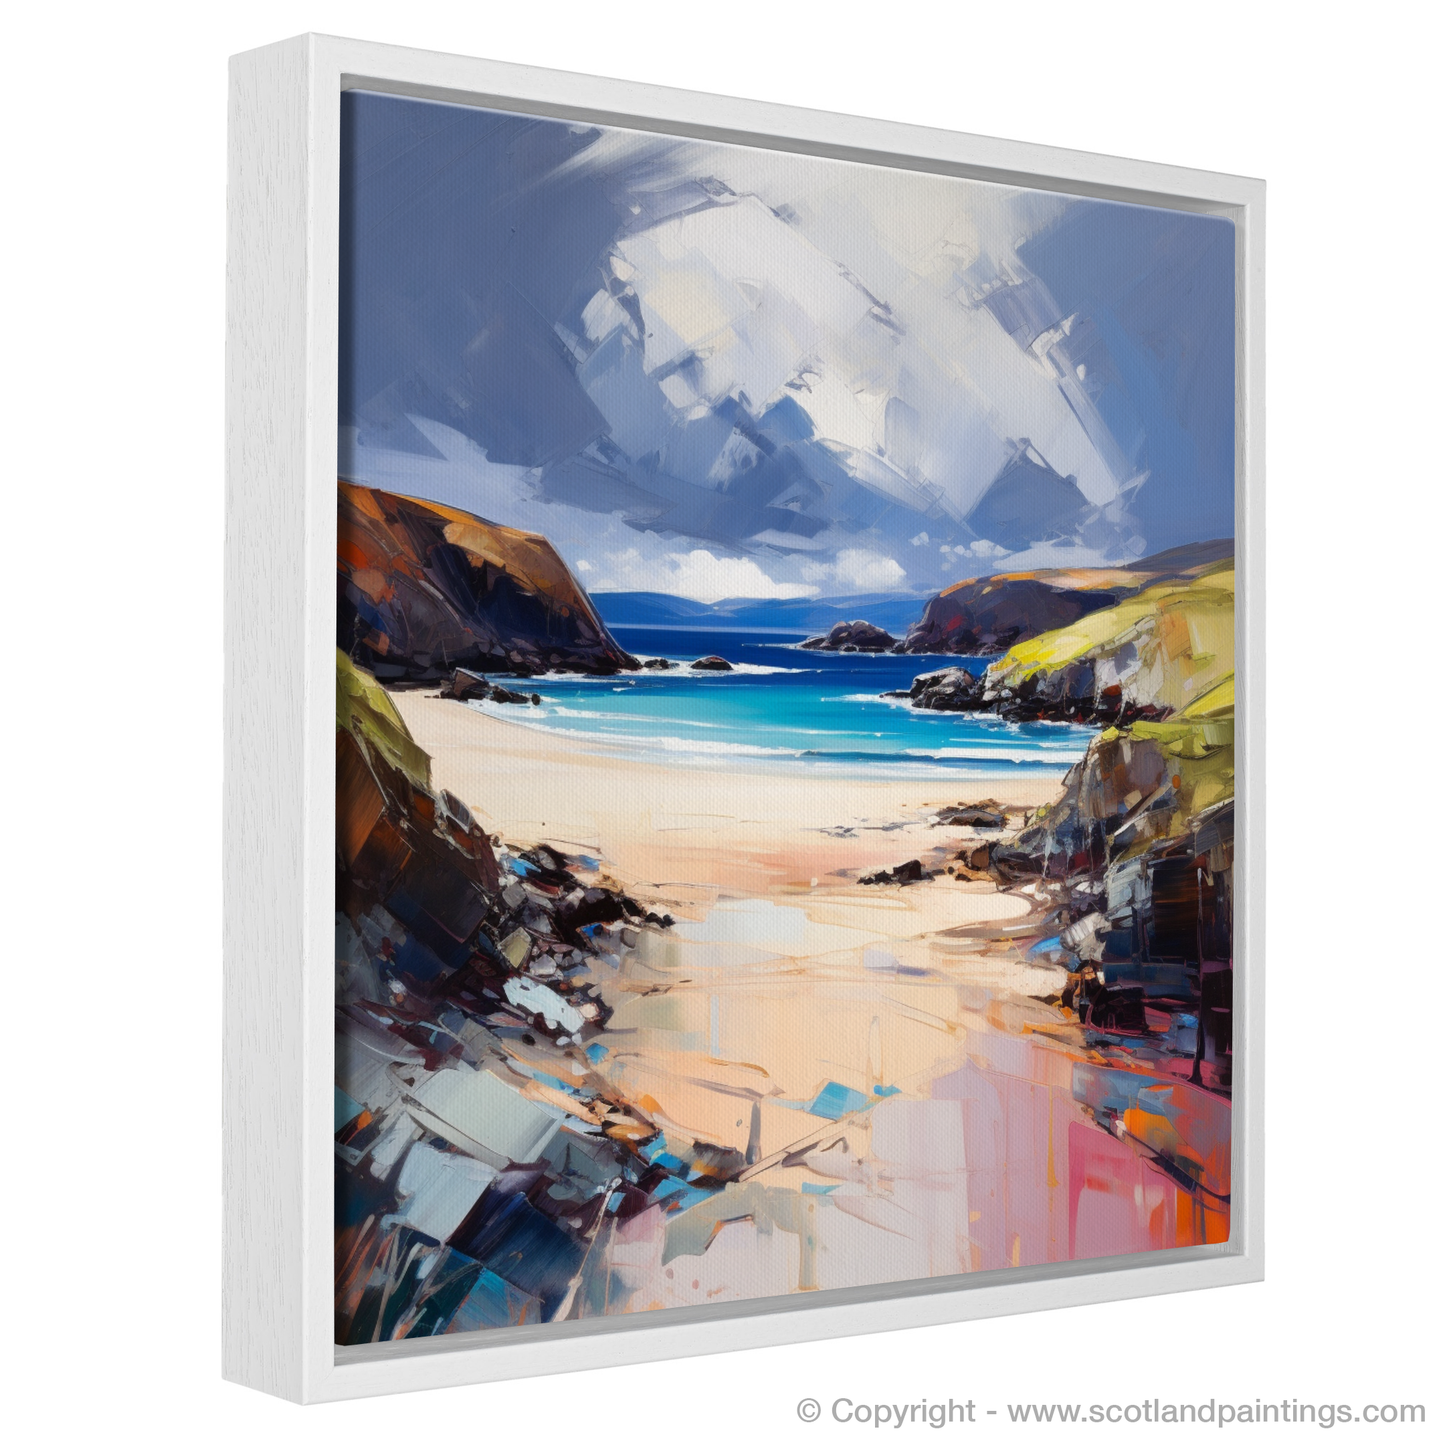 Painting and Art Print of Balnakeil Bay, Durness, Sutherland entitled "Balnakeil Bay Unleashed: An Expressionist Ode to Scottish Coves".